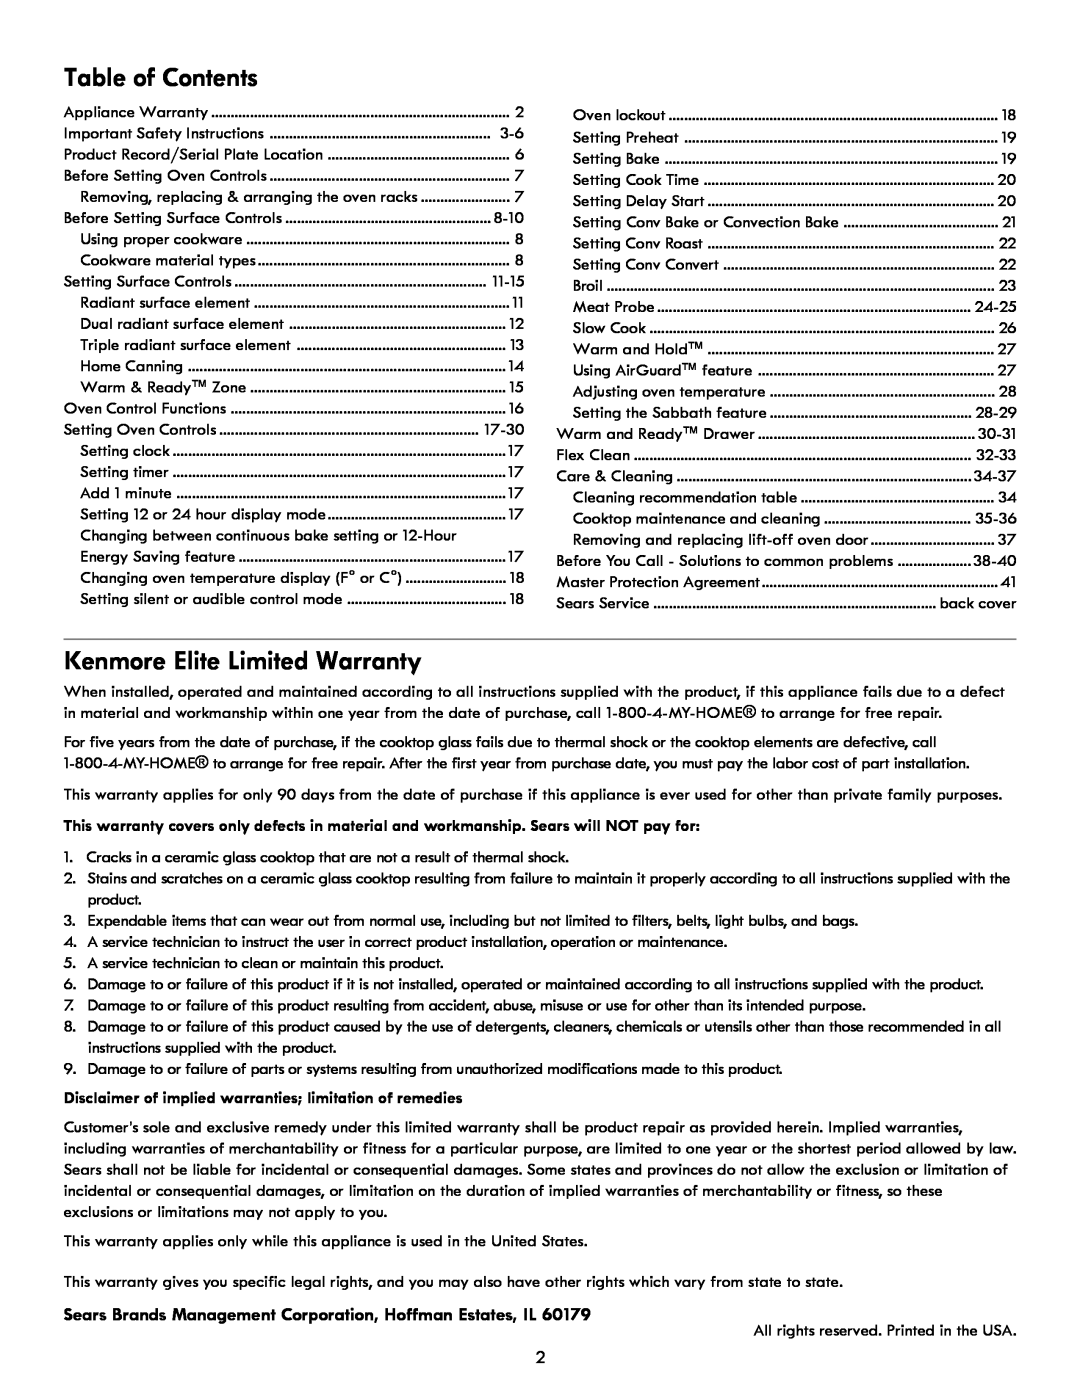 Kenmore 790 manual Table of Contents, Kenmore Elite Limited Warranty 